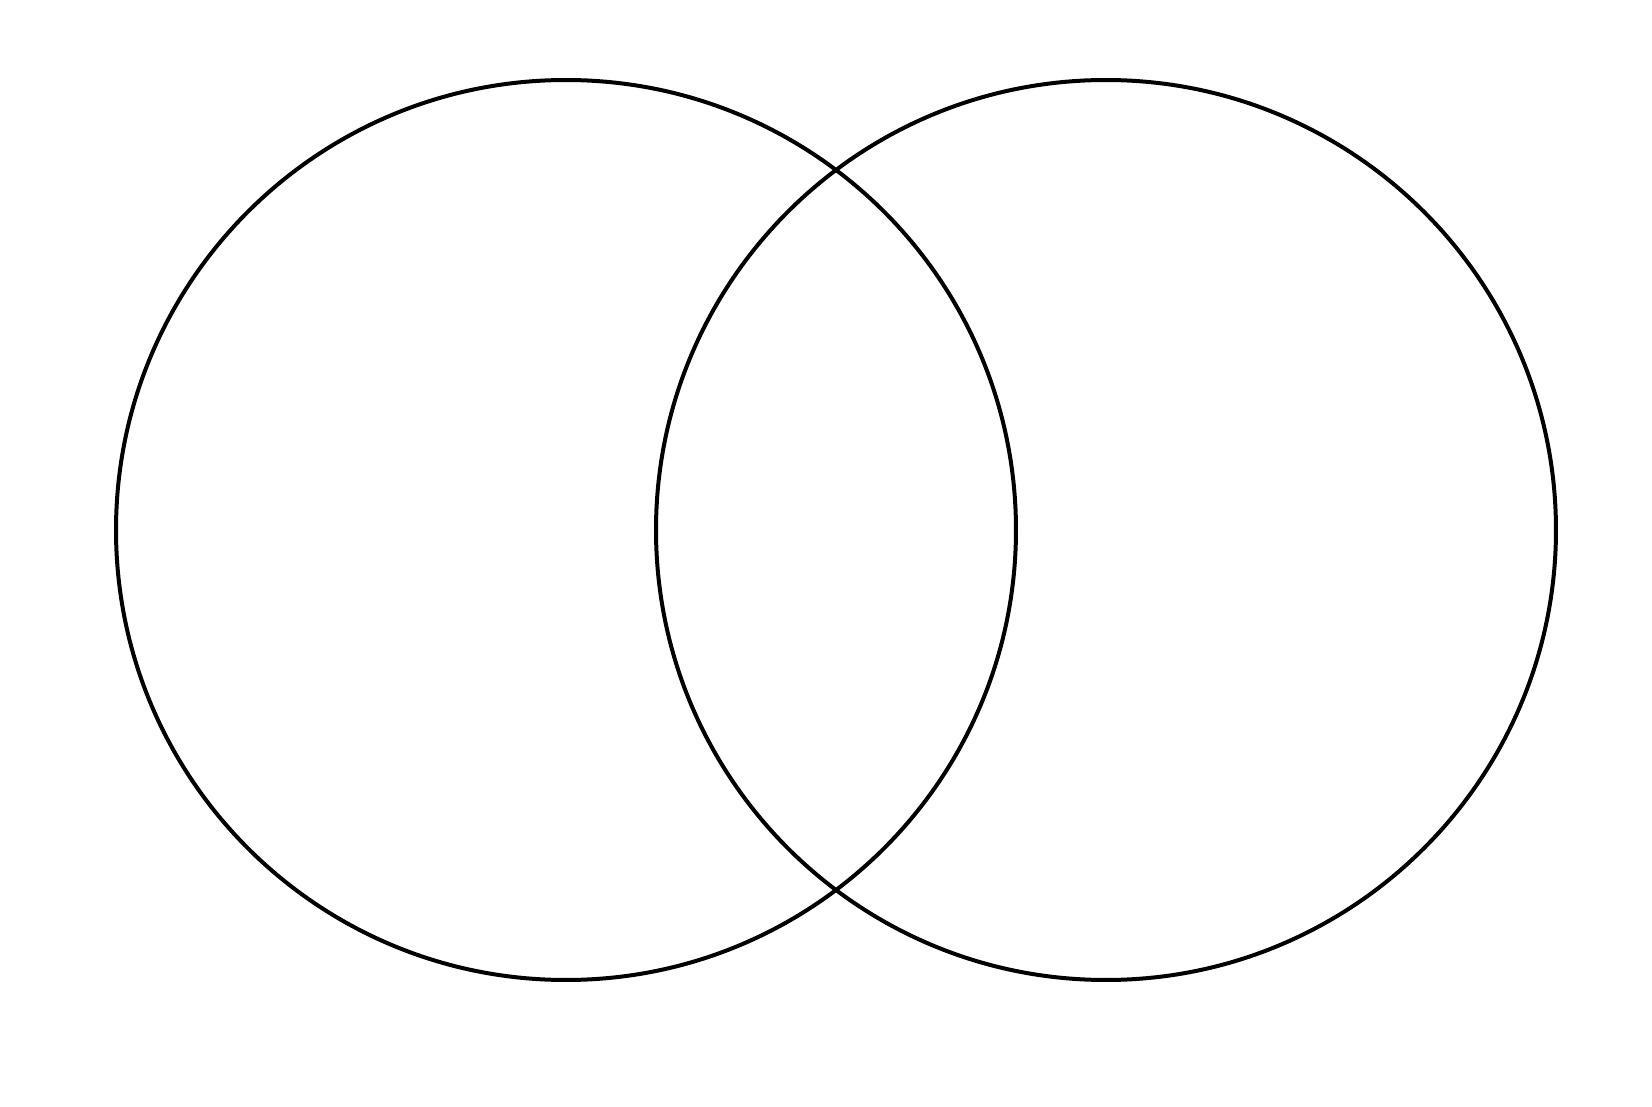 A blank Venn/Euler diagram consisting of two partially overlapping circles